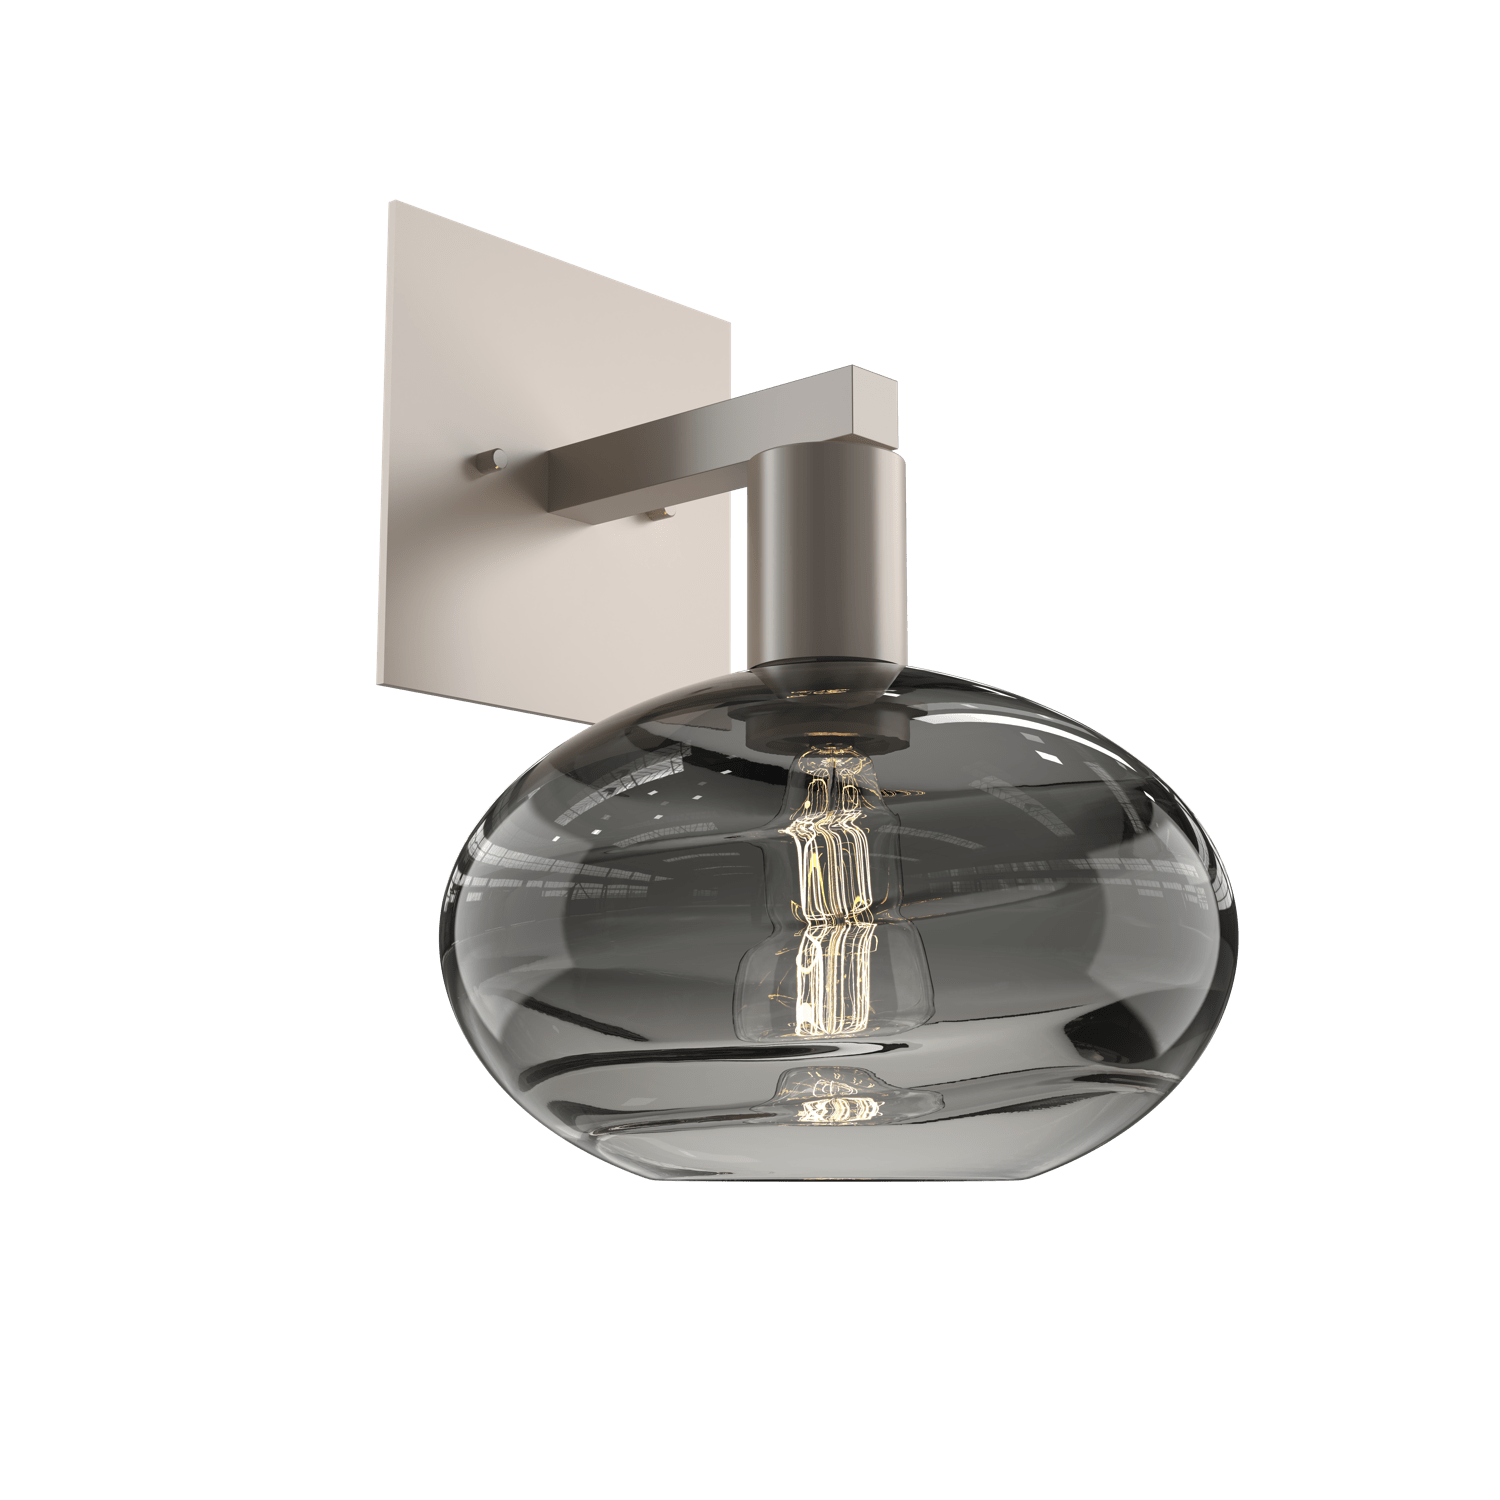 IDB0036-11-BS-OS-Hammerton-Studio-Optic-Blown-Glass-Coppa-wall-sconce-with-metallic-beige-silver-finish-and-optic-smoke-blown-glass-shades-and-incandescent-lamping